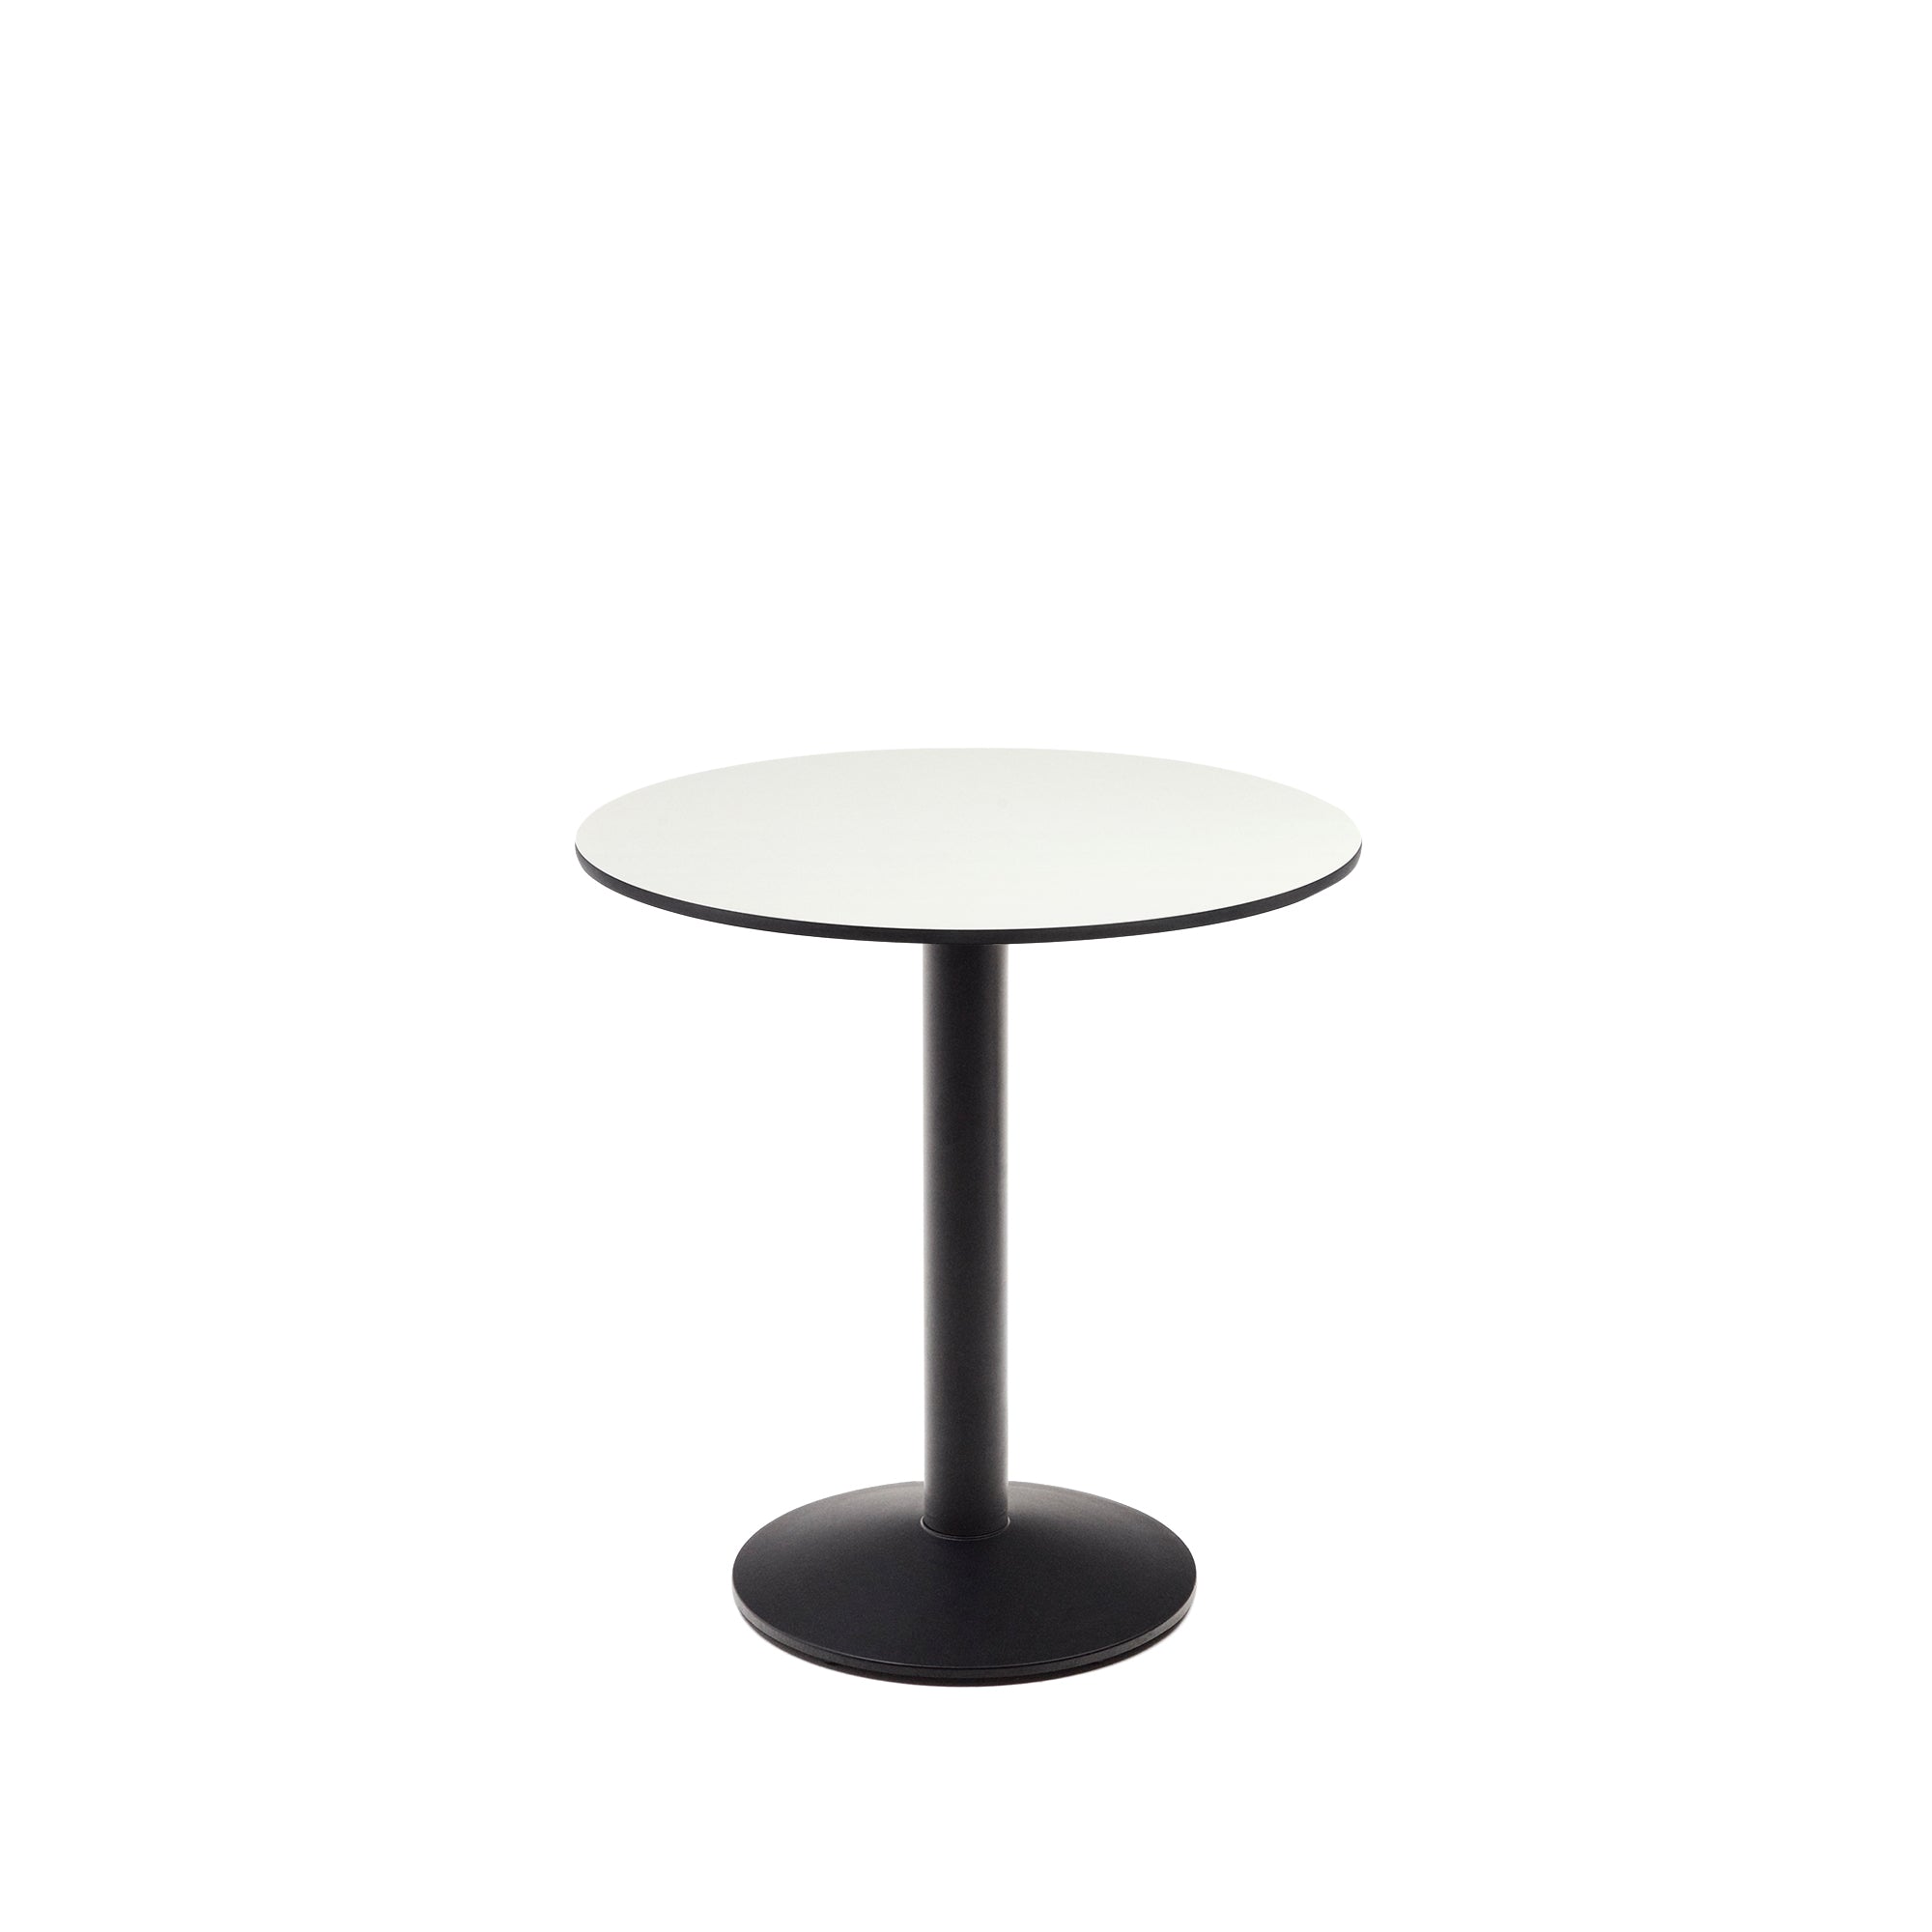 Esilda round outdoor table in white with metal leg in a painted black finish, Ø 70 x 70 cm